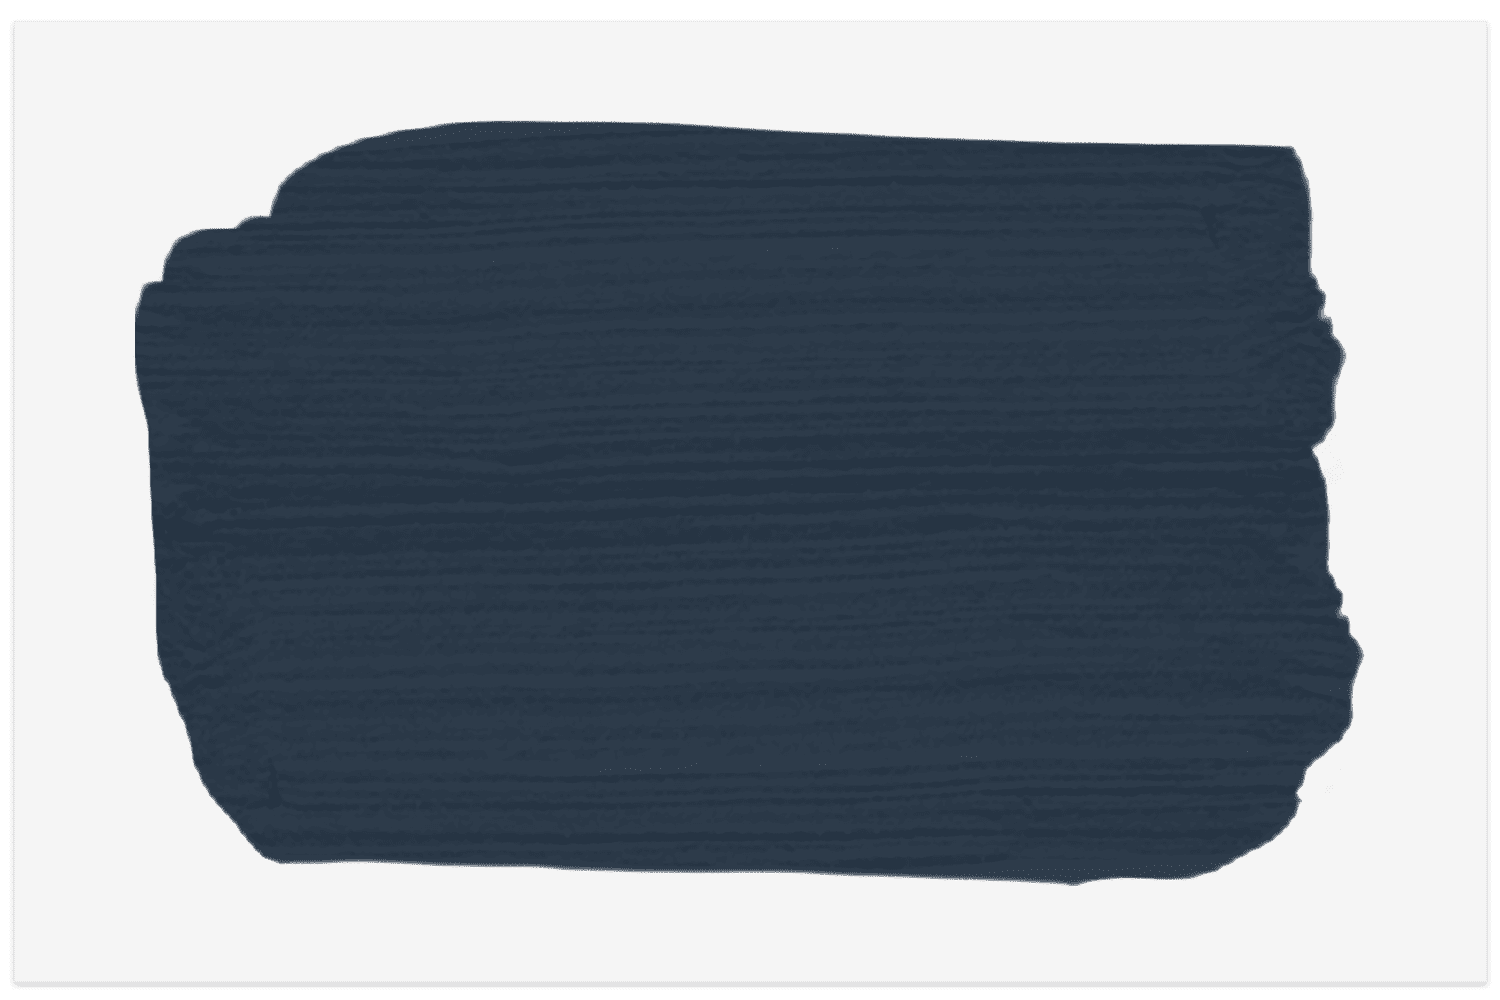 Naval swatch from Sherwin-Williams